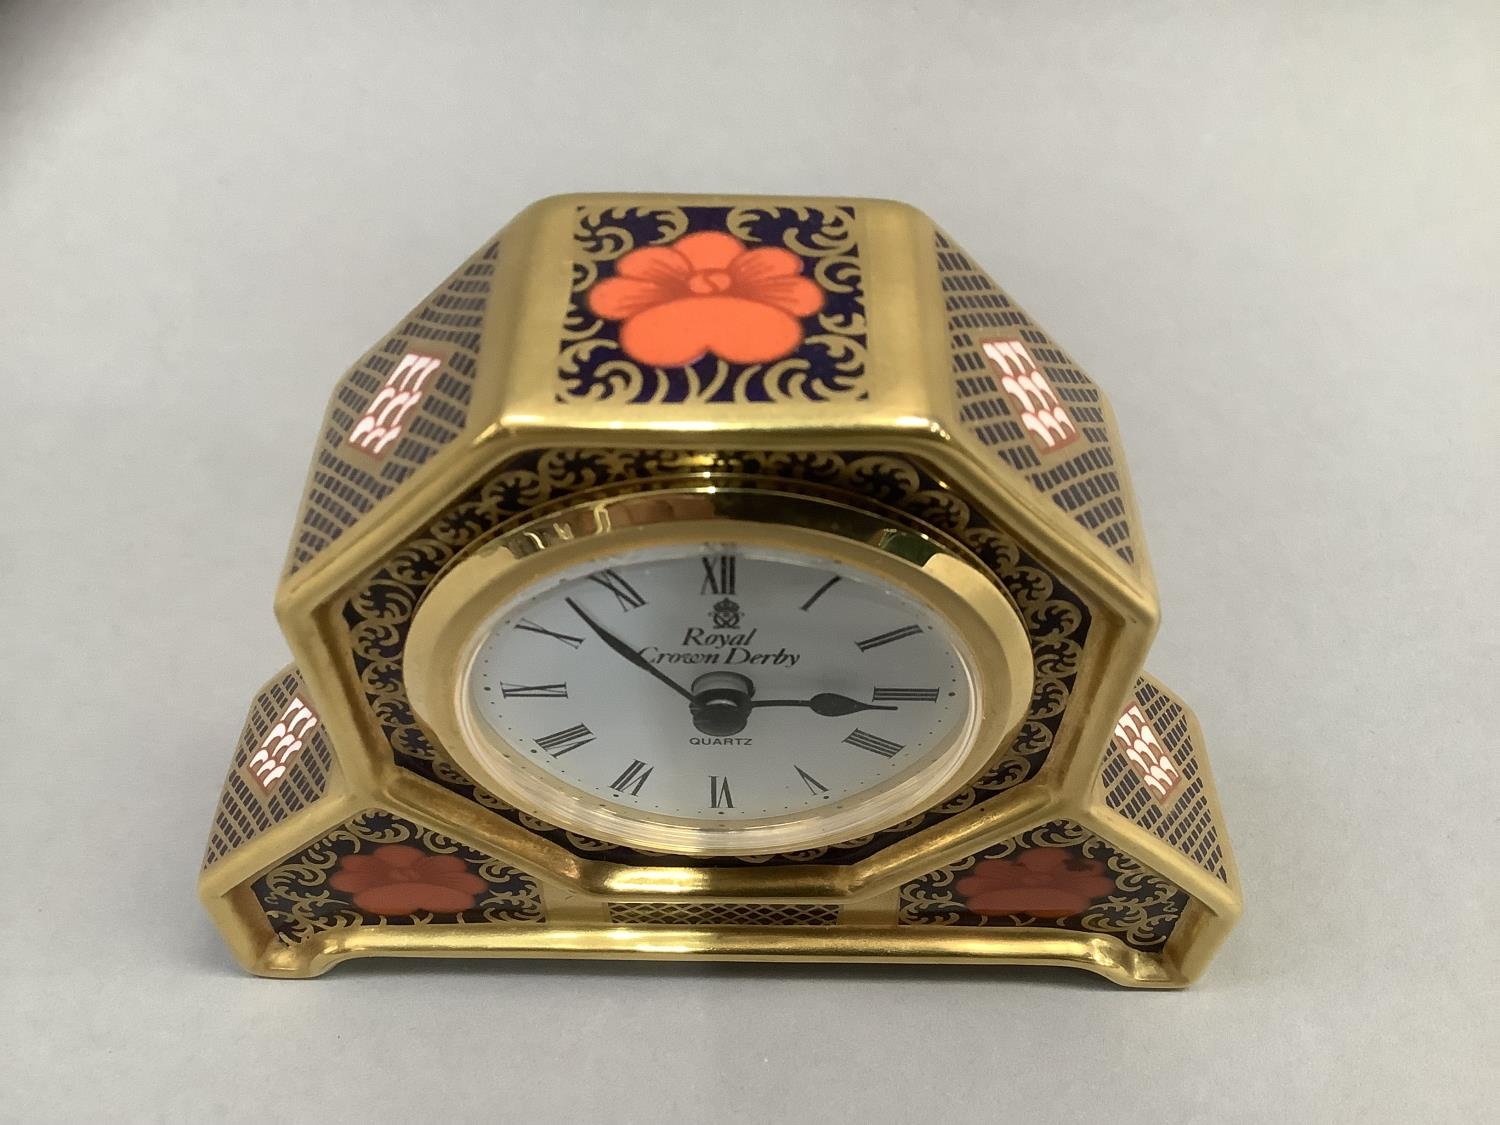 A Royal Crown Derby mantle clock of old Imari pattern 1128 10.5cm high - Image 3 of 6